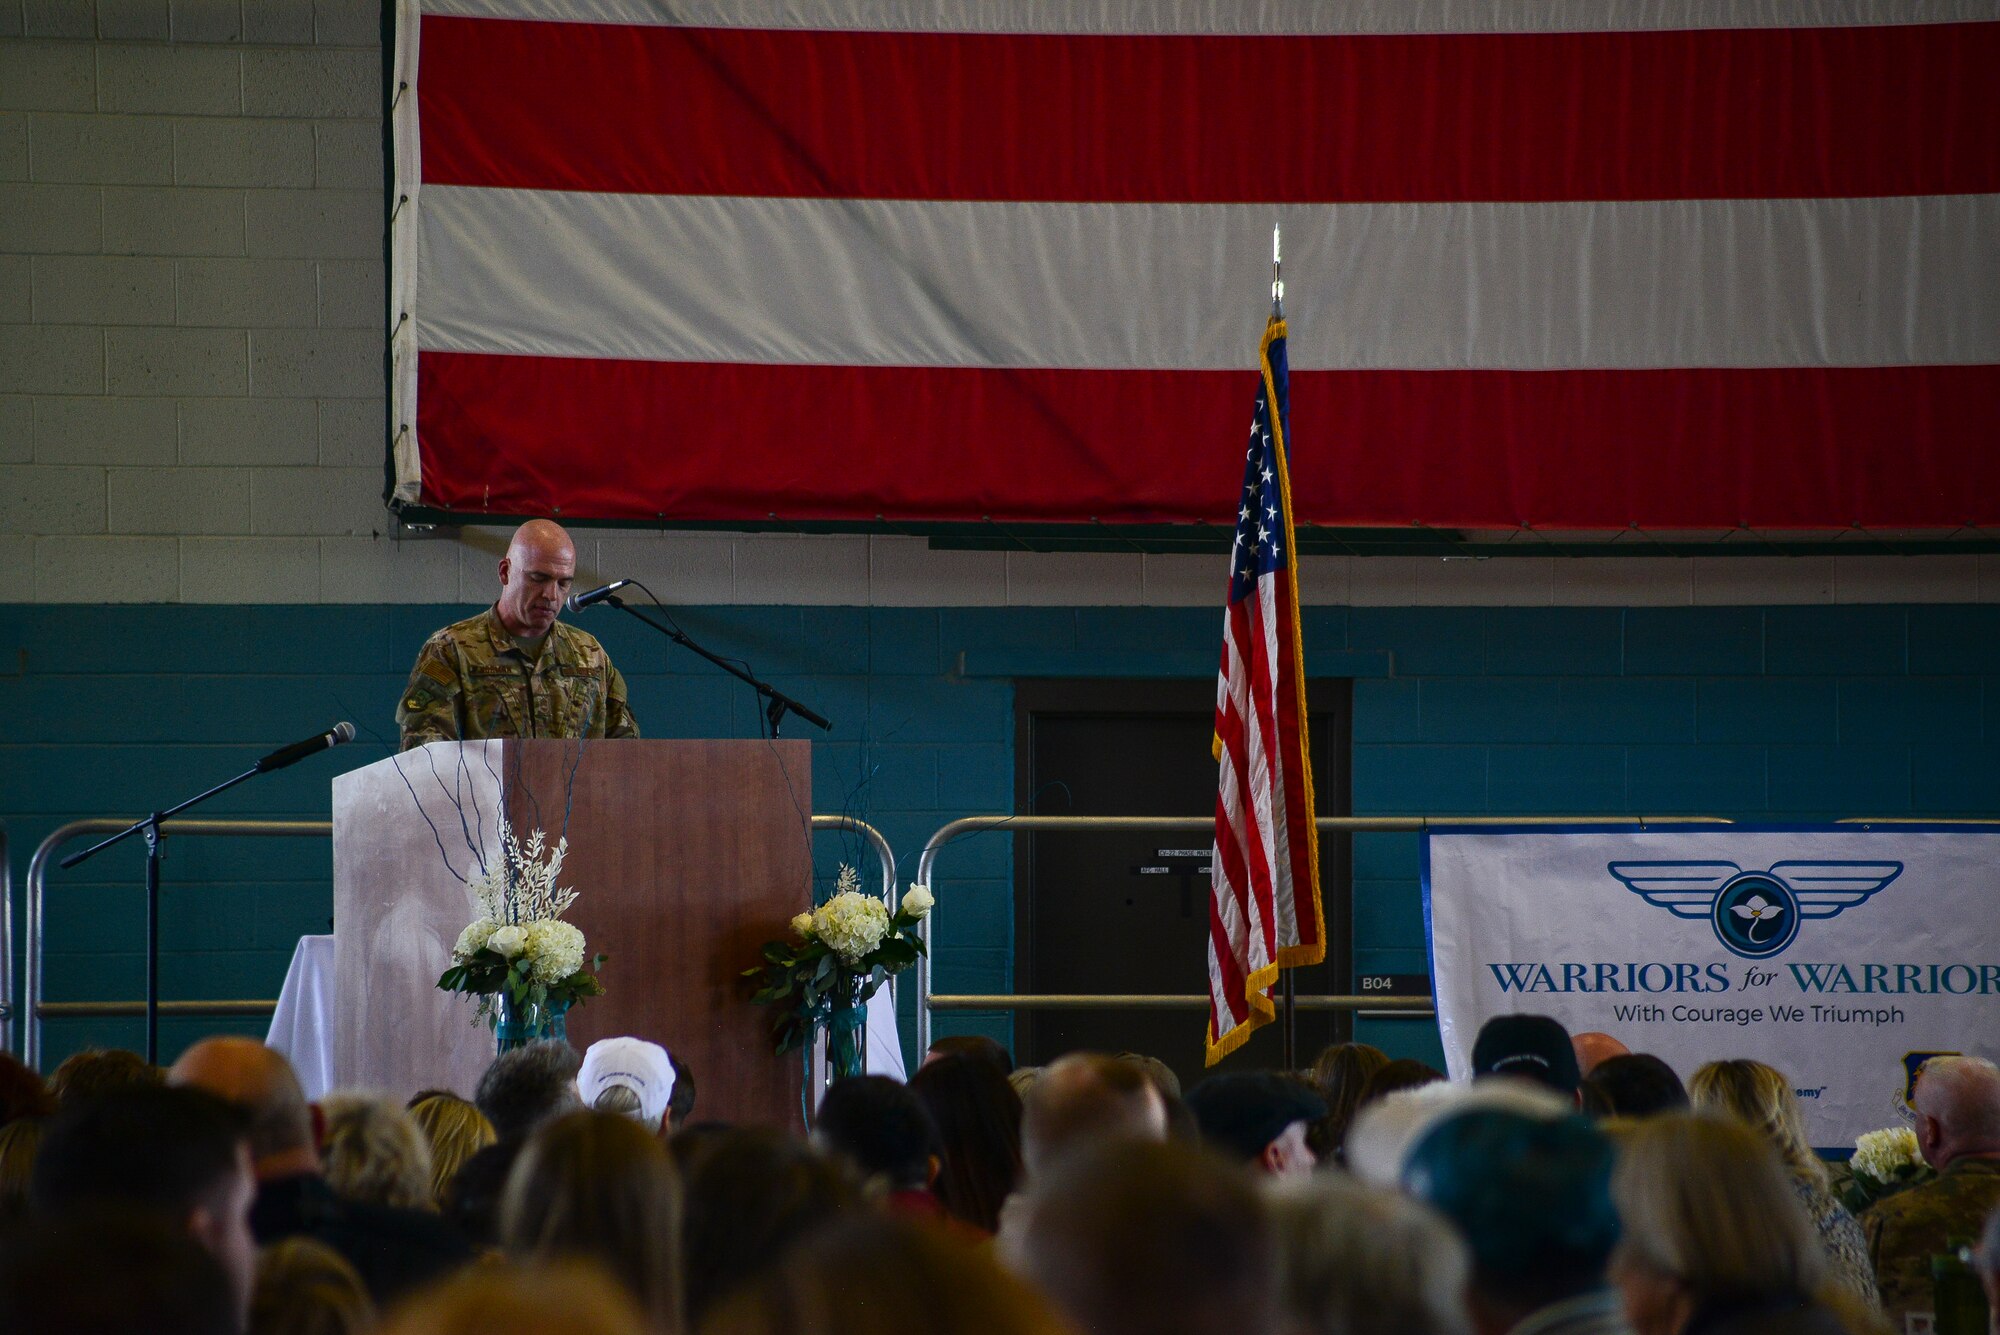 Retired U.S. Air Force Chief Master Sgt. Kevin Norman, former 58th Aircraft Maintenance Squadron superintendent and Warriors for Warriors founder, speaks during the event at Kirtland Air Force Base, N.M., Nov. 2, 2019. Norman has been assisting with setting up this event for three years, and will continue to do so. (U.S. Air Force photo by Staff Sgt. Kimberly Nagle)